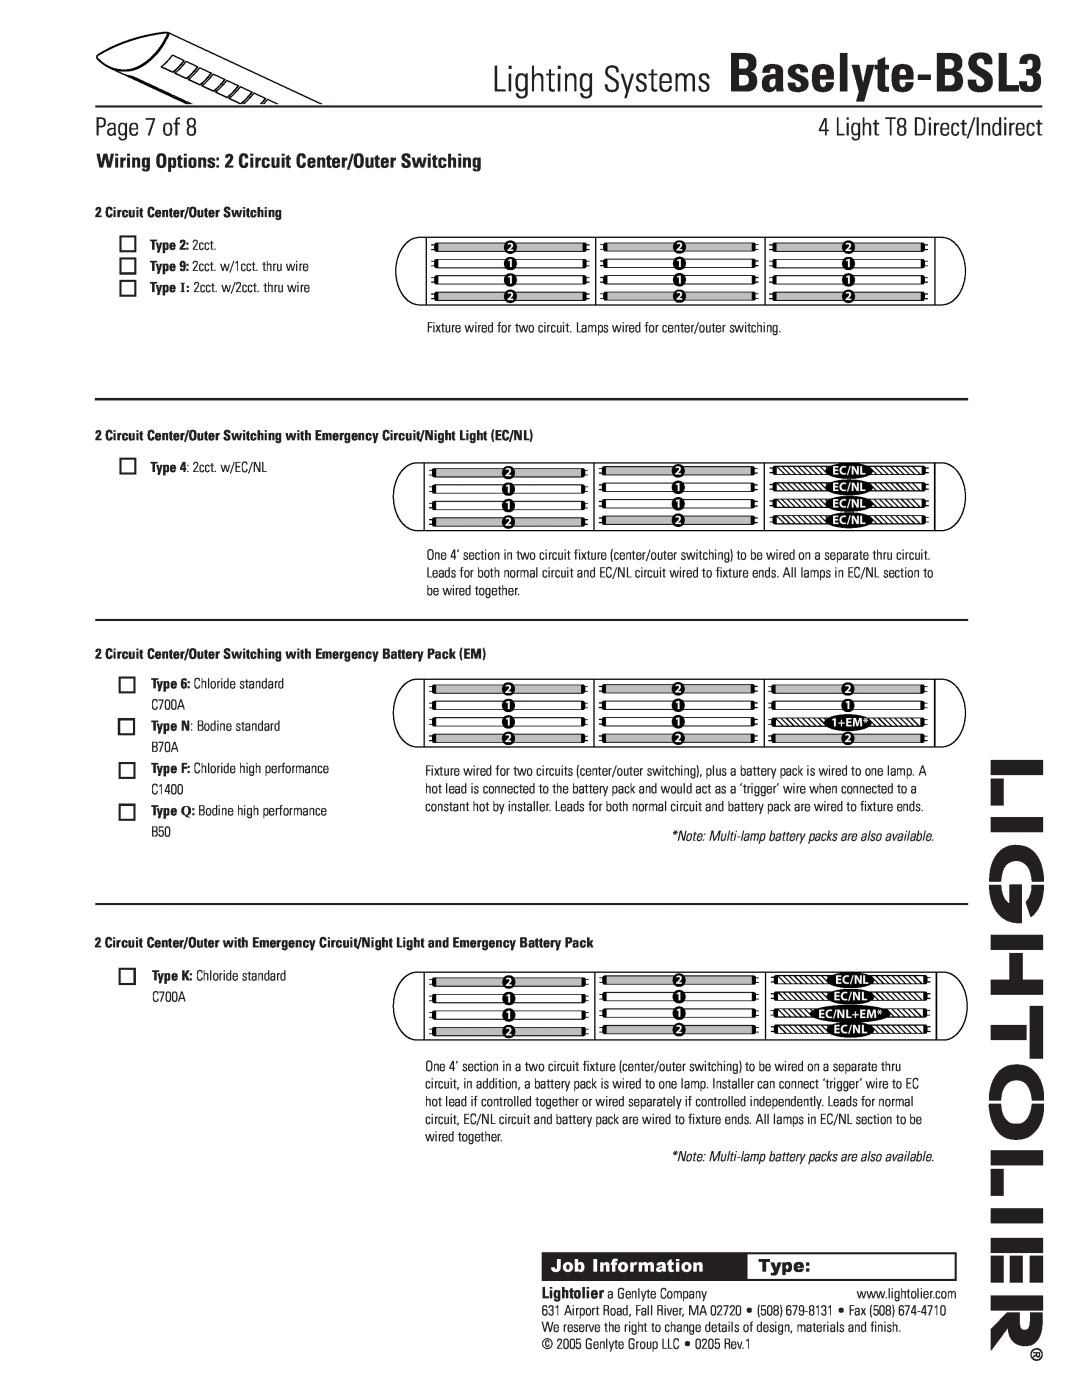 Lightolier Baselyte-BSL3 Wiring Options 2 Circuit Center/Outer Switching, Circuit Center/Outer Switching Type 2 2cct 